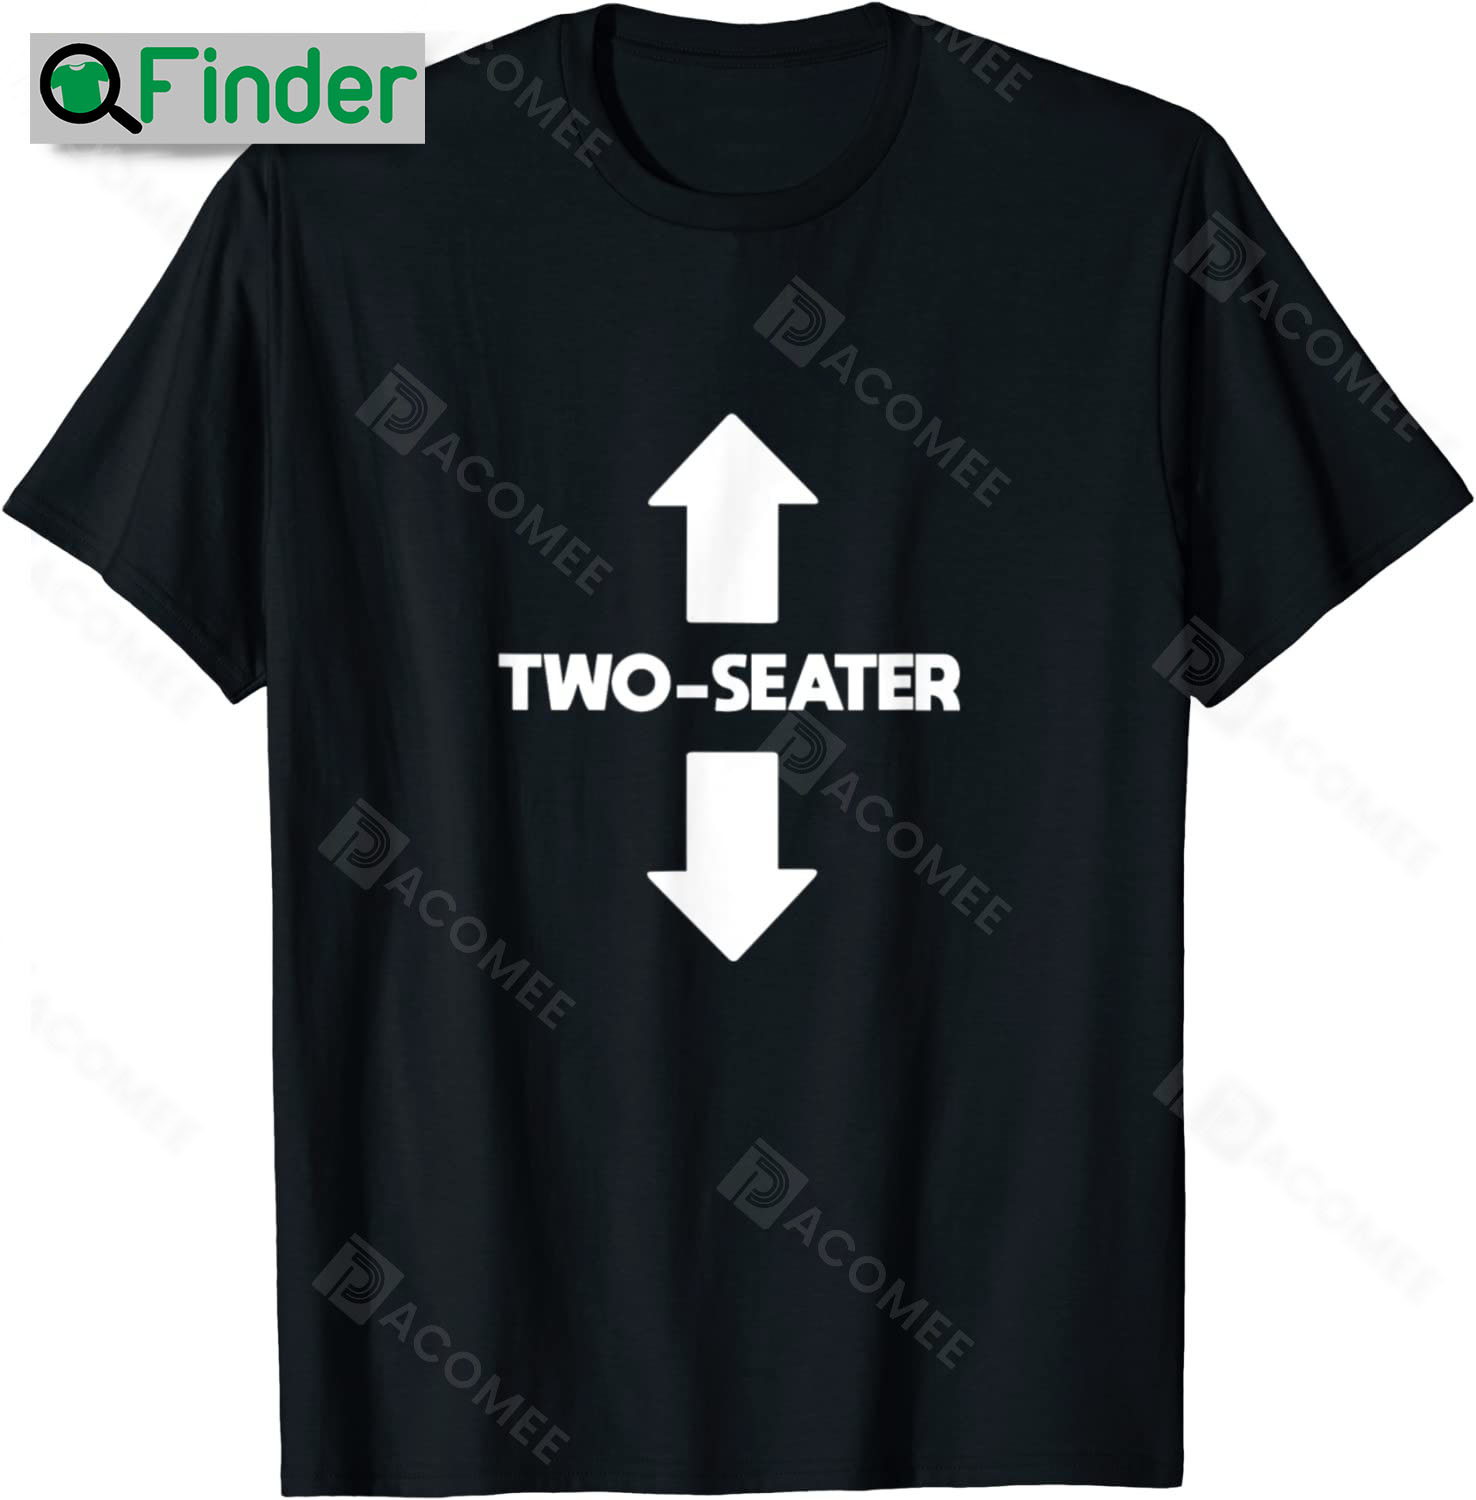 Arrow-Up-Arrow-Down-Face-Lap-Funny-Two-Seaters-Shirt - Q-Finder ...